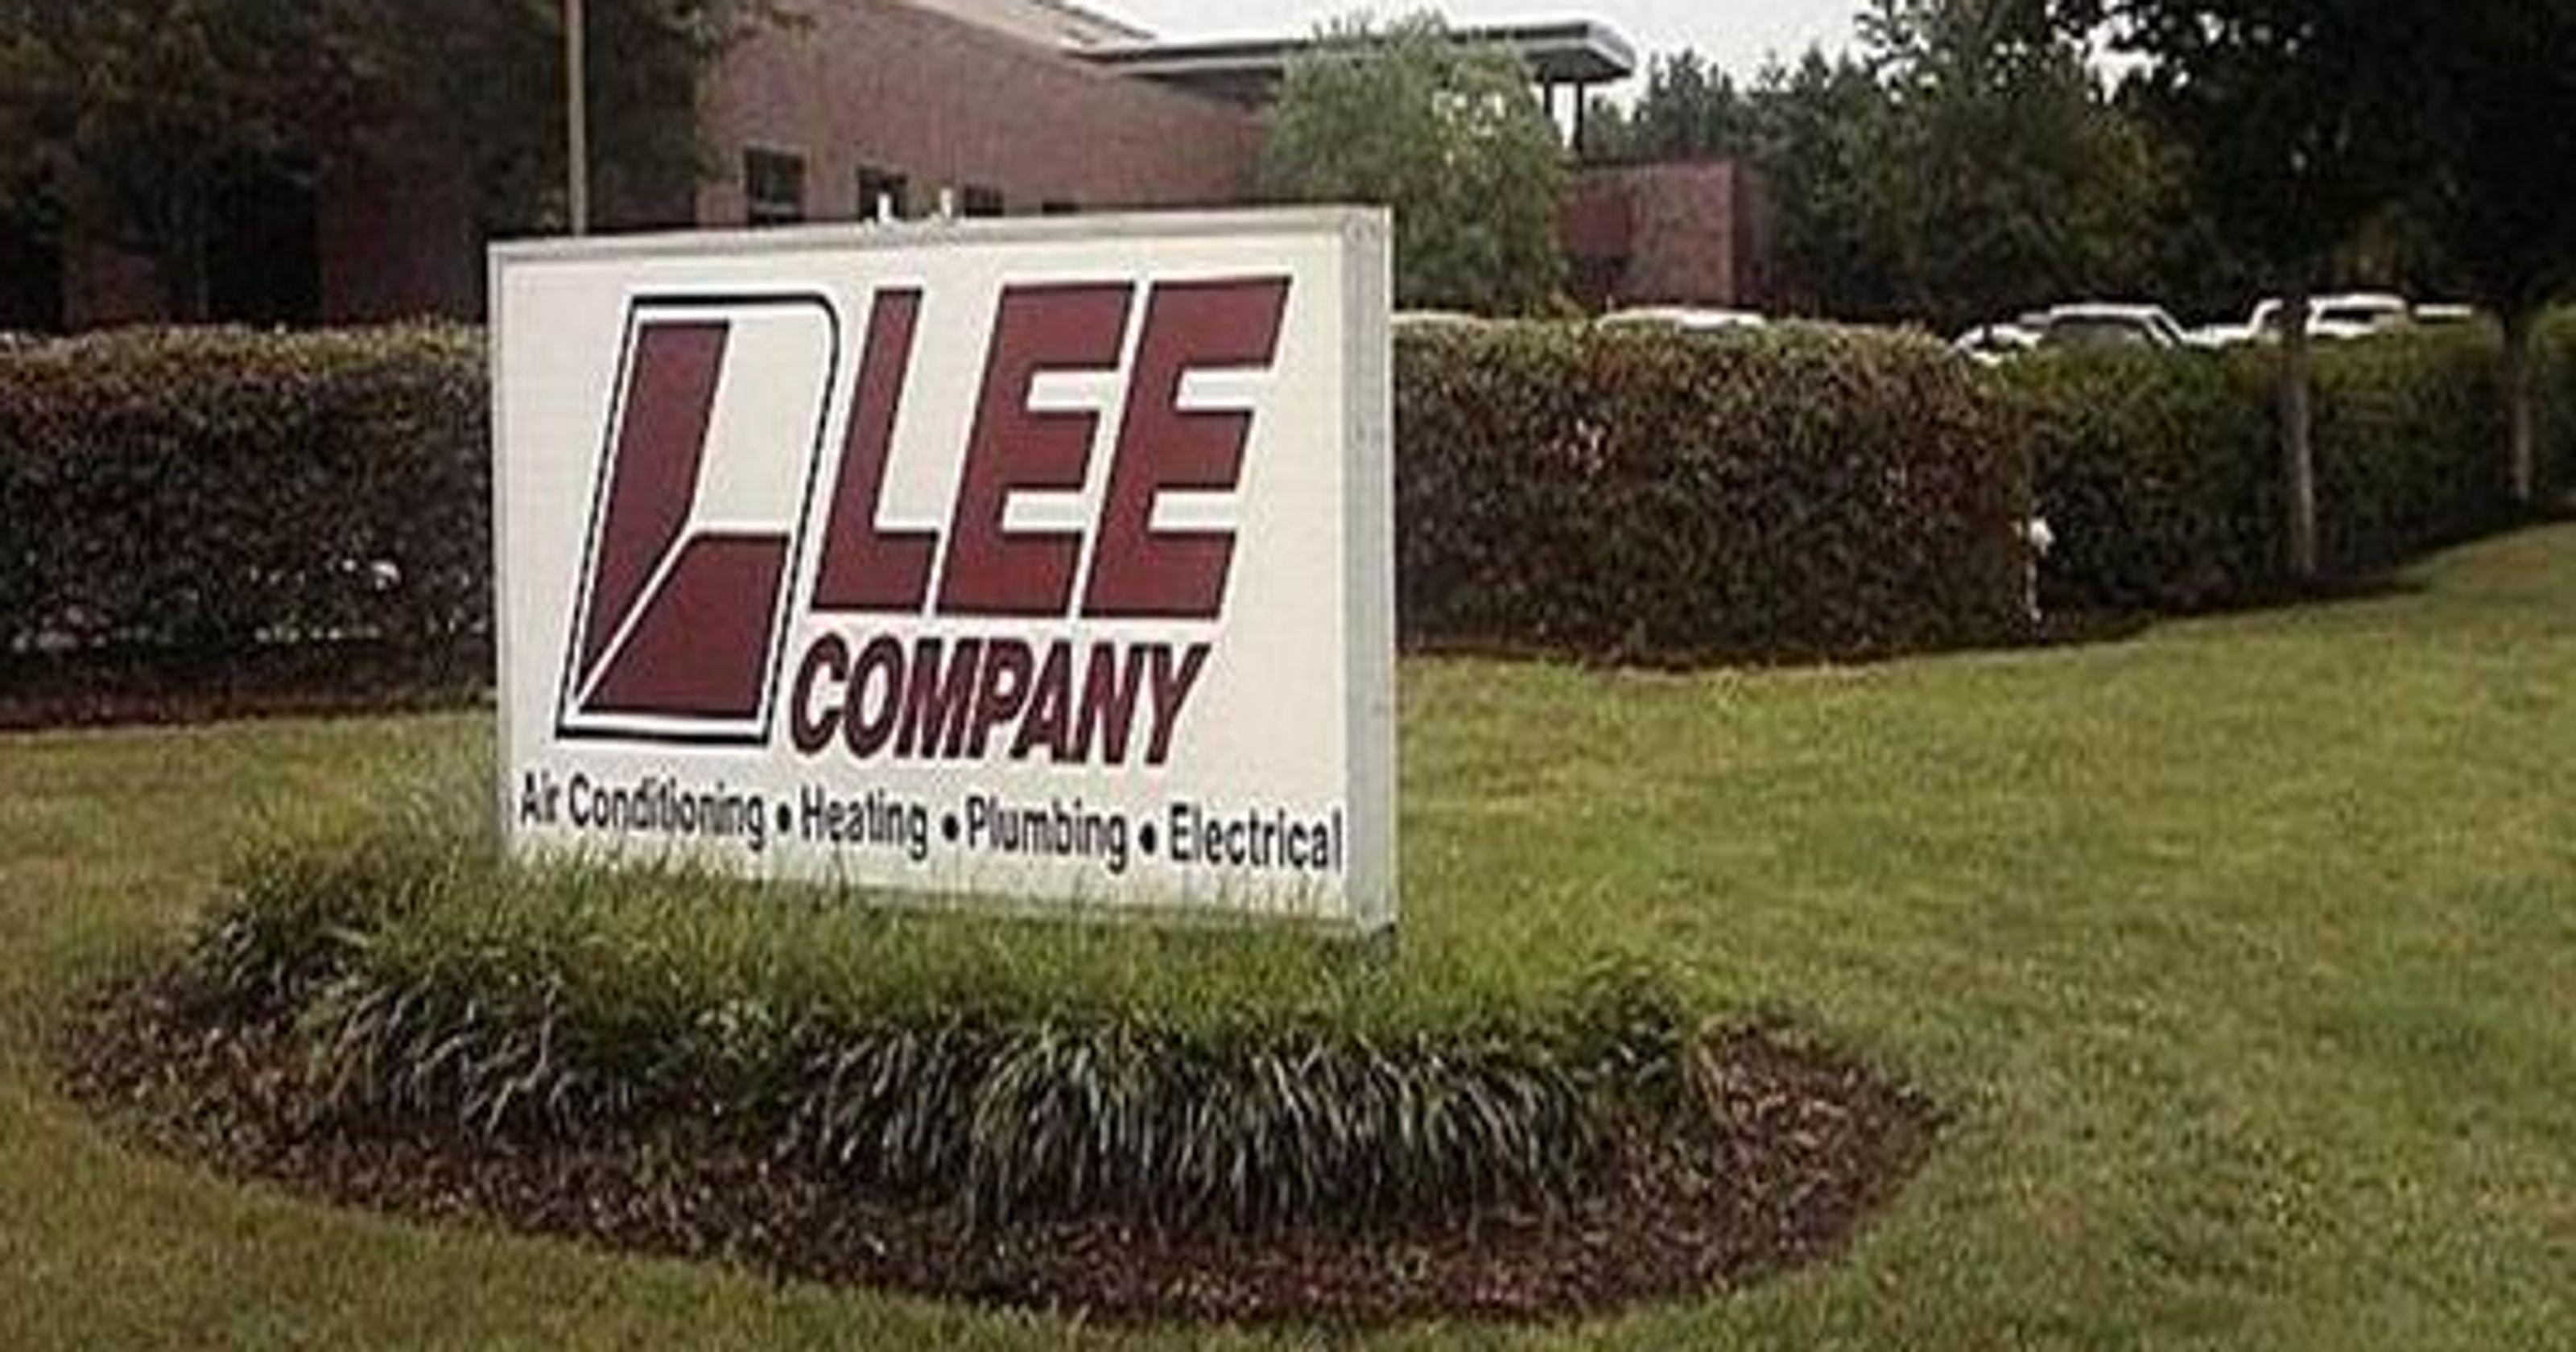 Lee Company Logo - Tennessee Elections: Lee Company Sends Cease And Desist Letter To